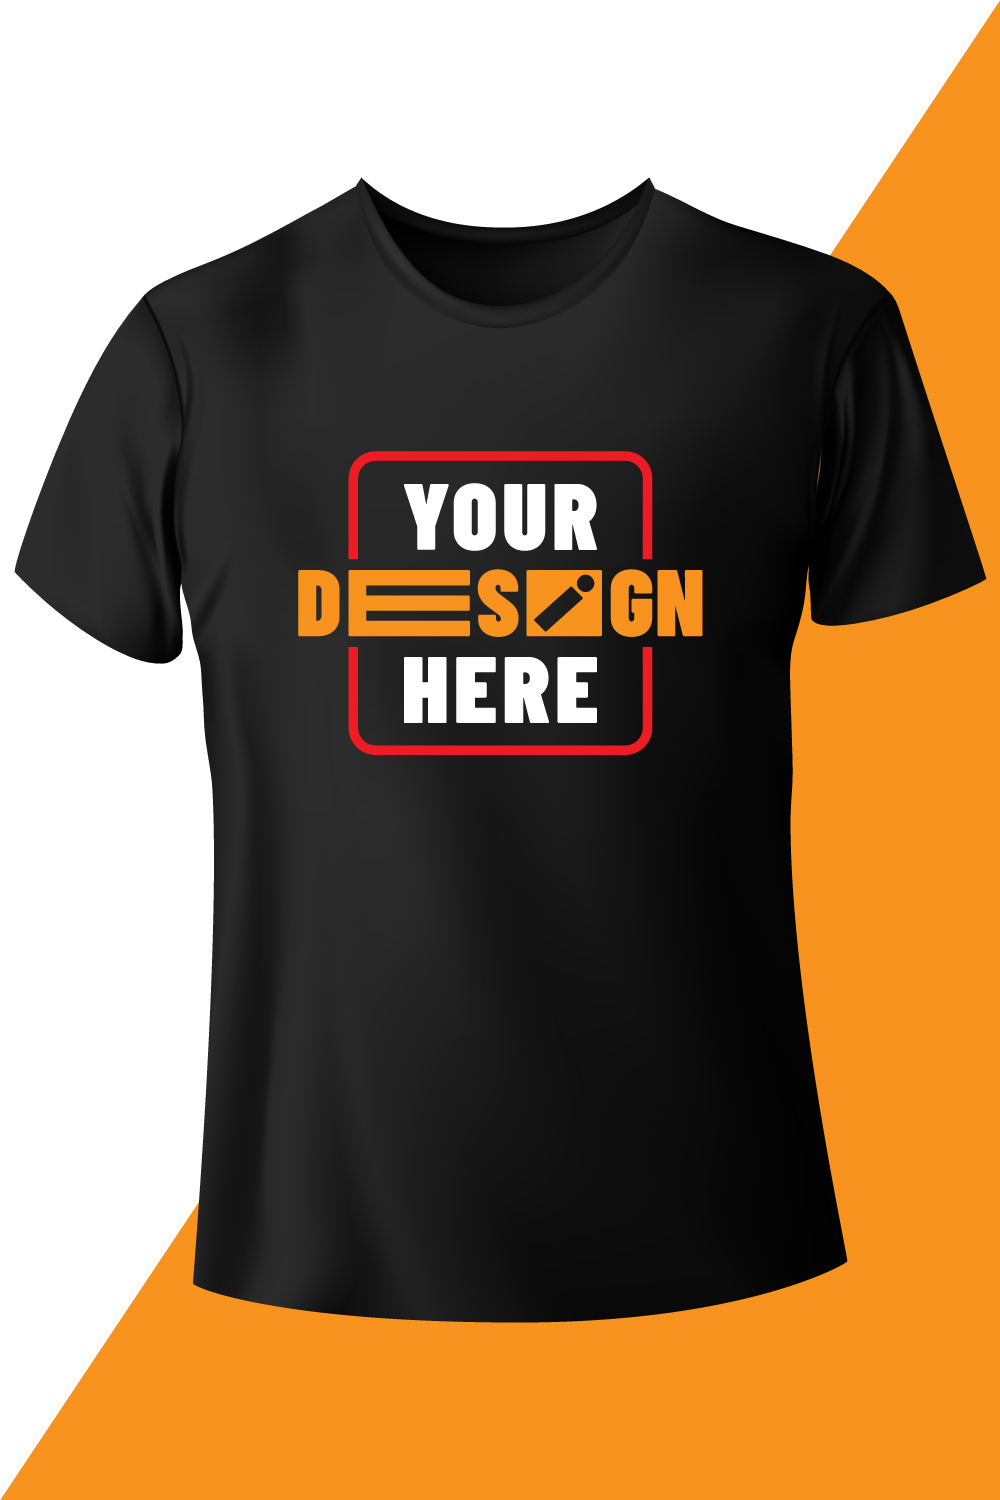 Image of a black t-shirt with an enchanting print Your Design Here.